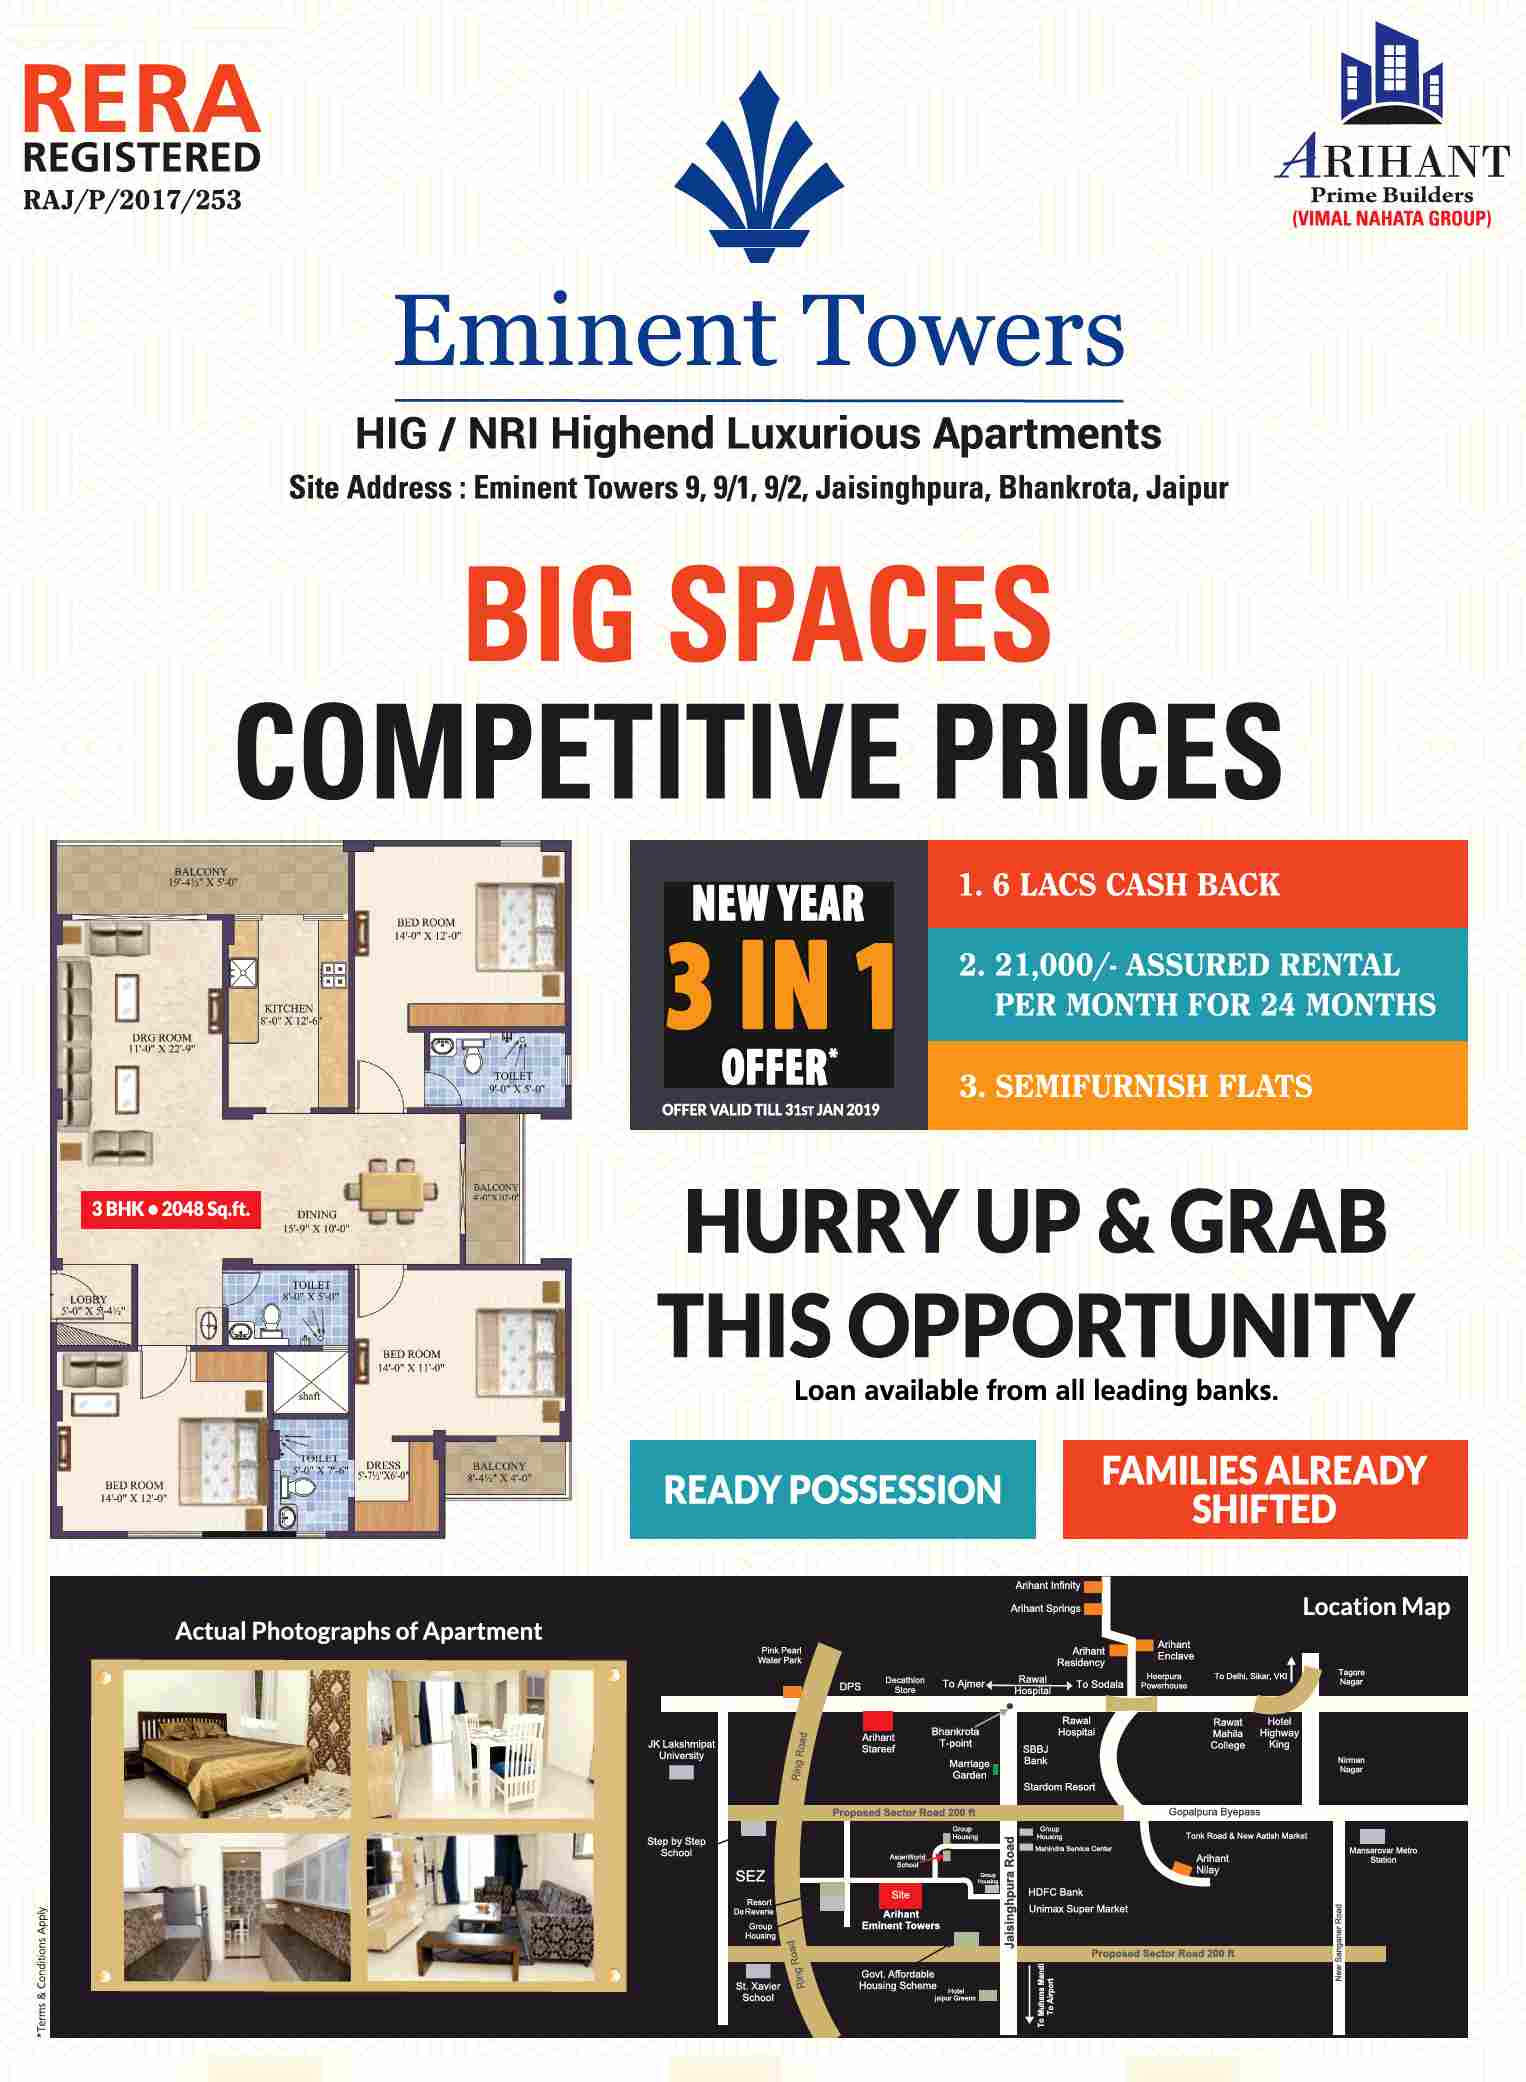 Get Rs 21000 assured rental per month for 24 months at Arihant Eminent Towers in Jaipur Update